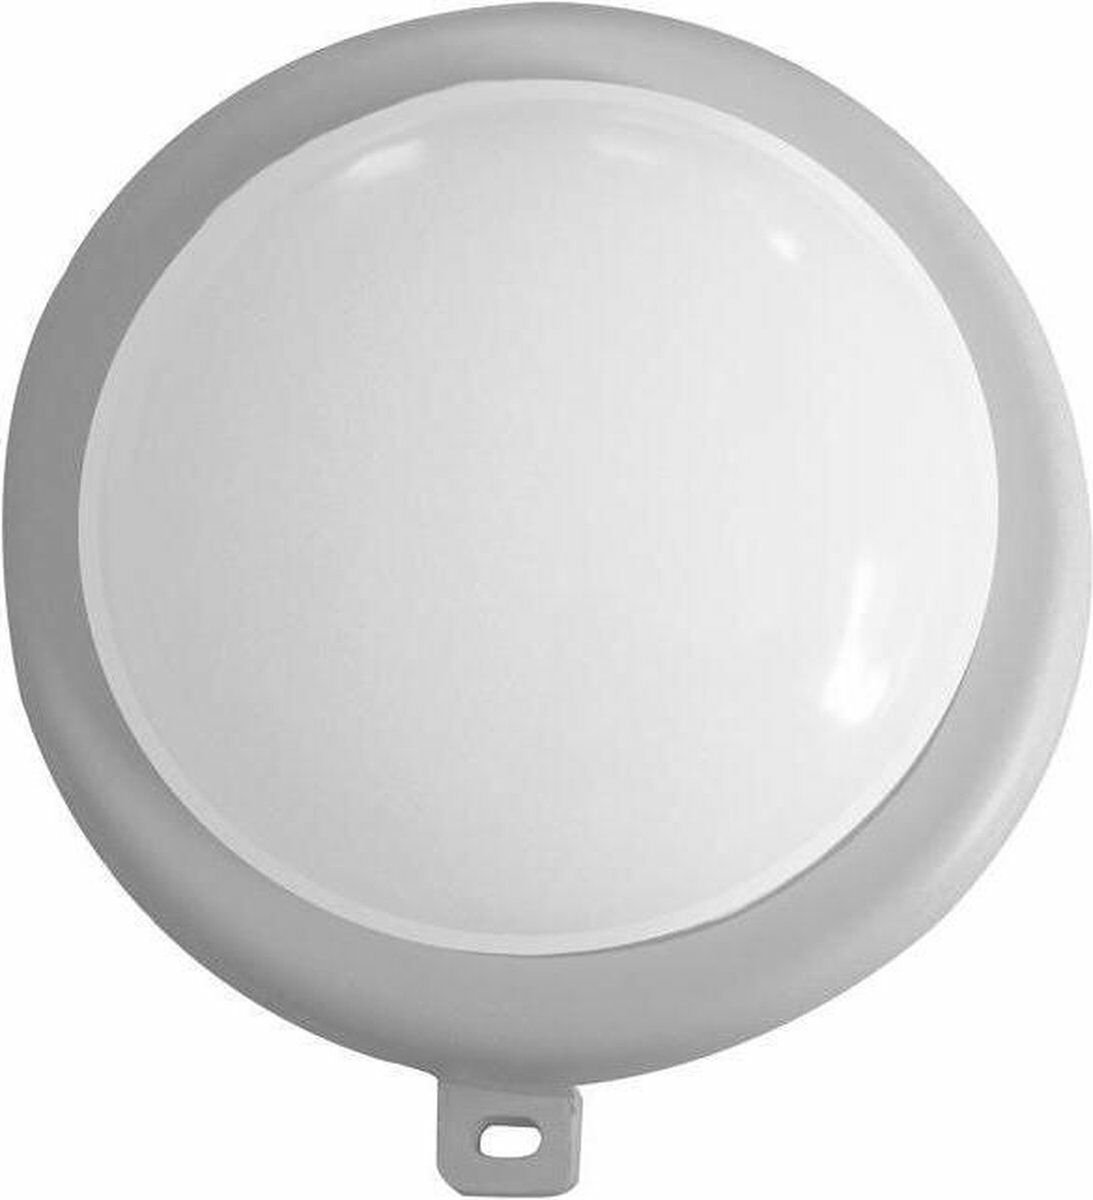 I-WATTS - Padverlichting - LED - Rond - Wit - 6W